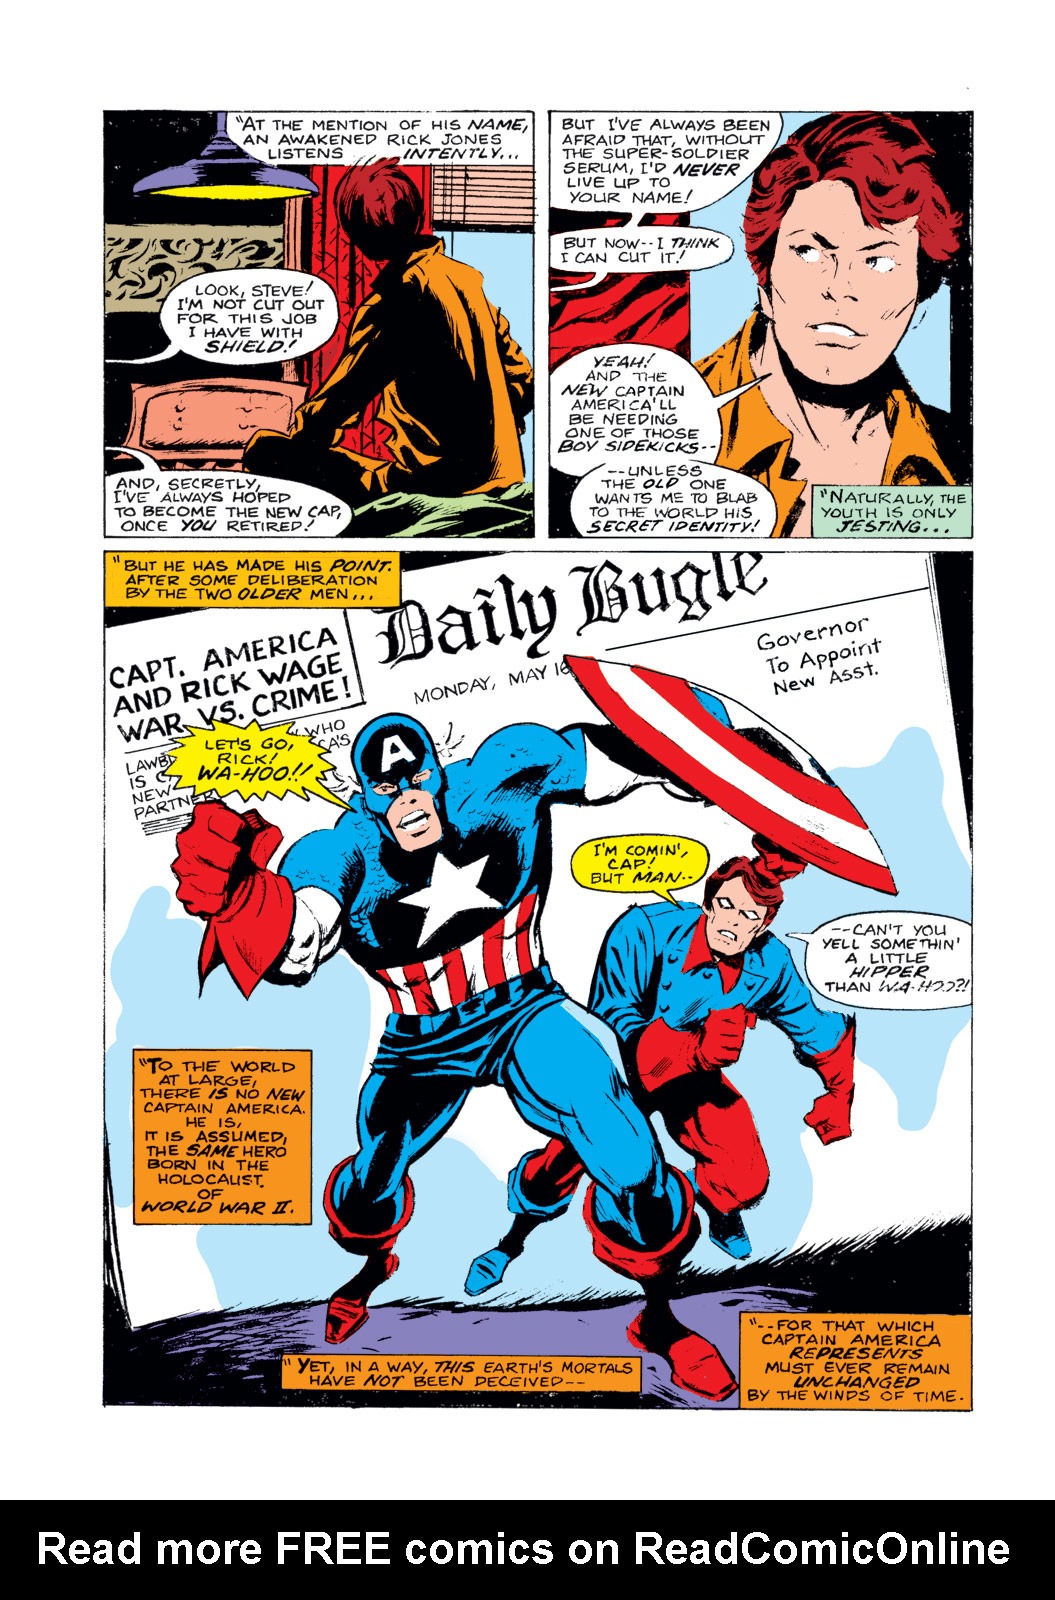 What If? (1977) issue 5 - Captain America hadn't vanished during World War Two - Page 19